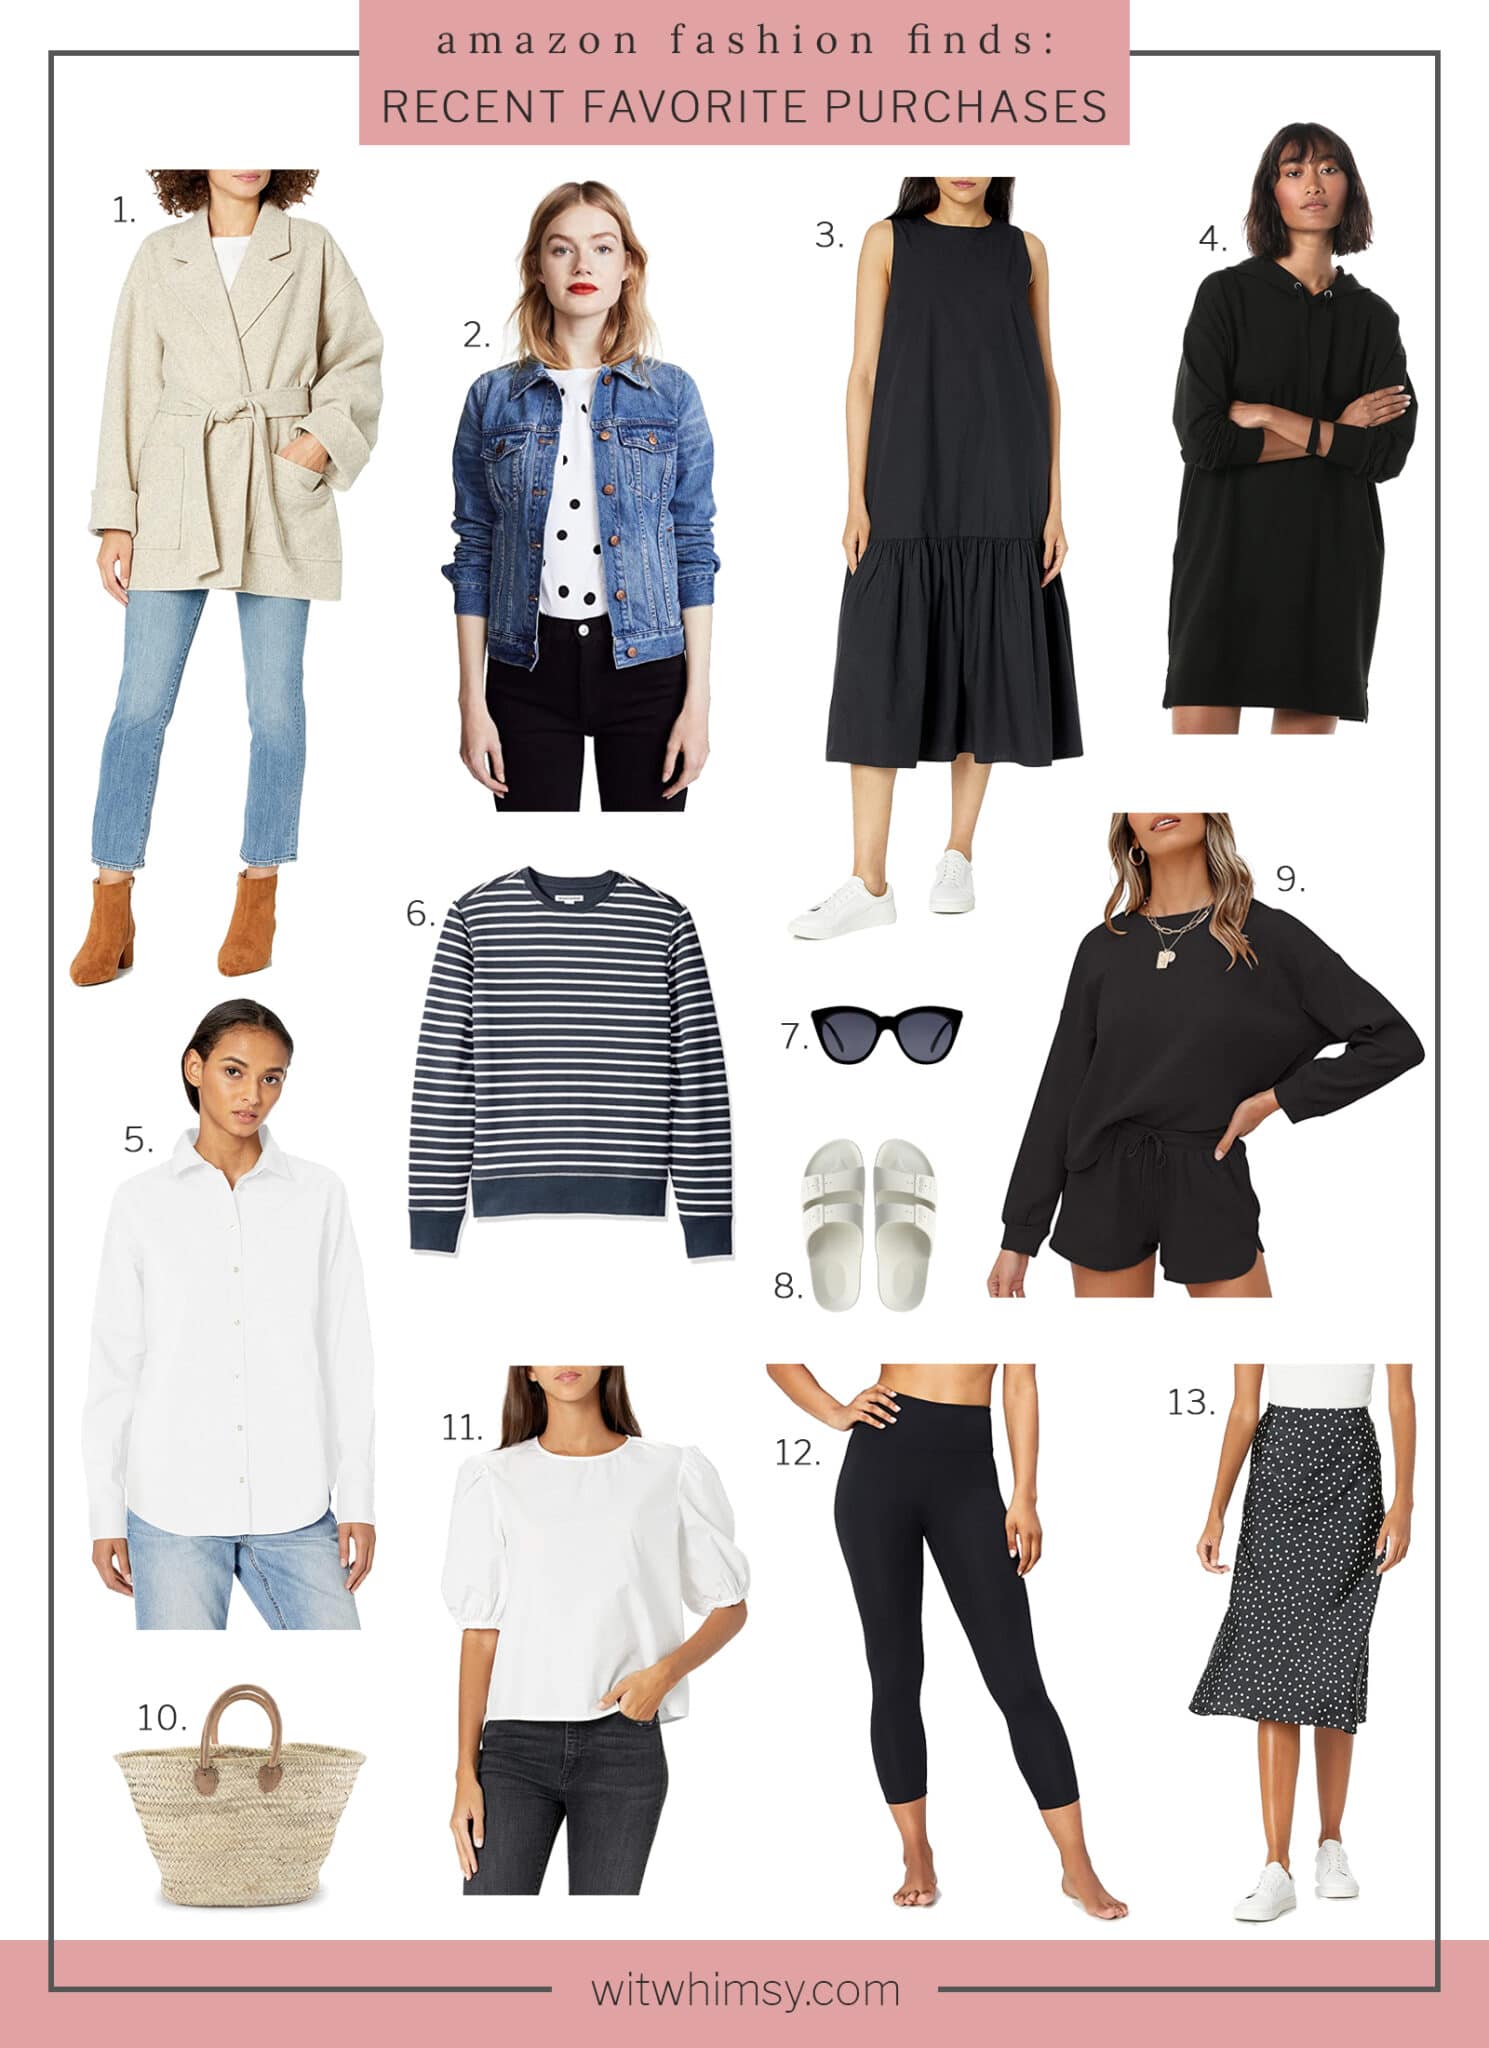 Recent Amazon Fashion Favorites + What I'm Eyeing for Spring - wit & whimsy